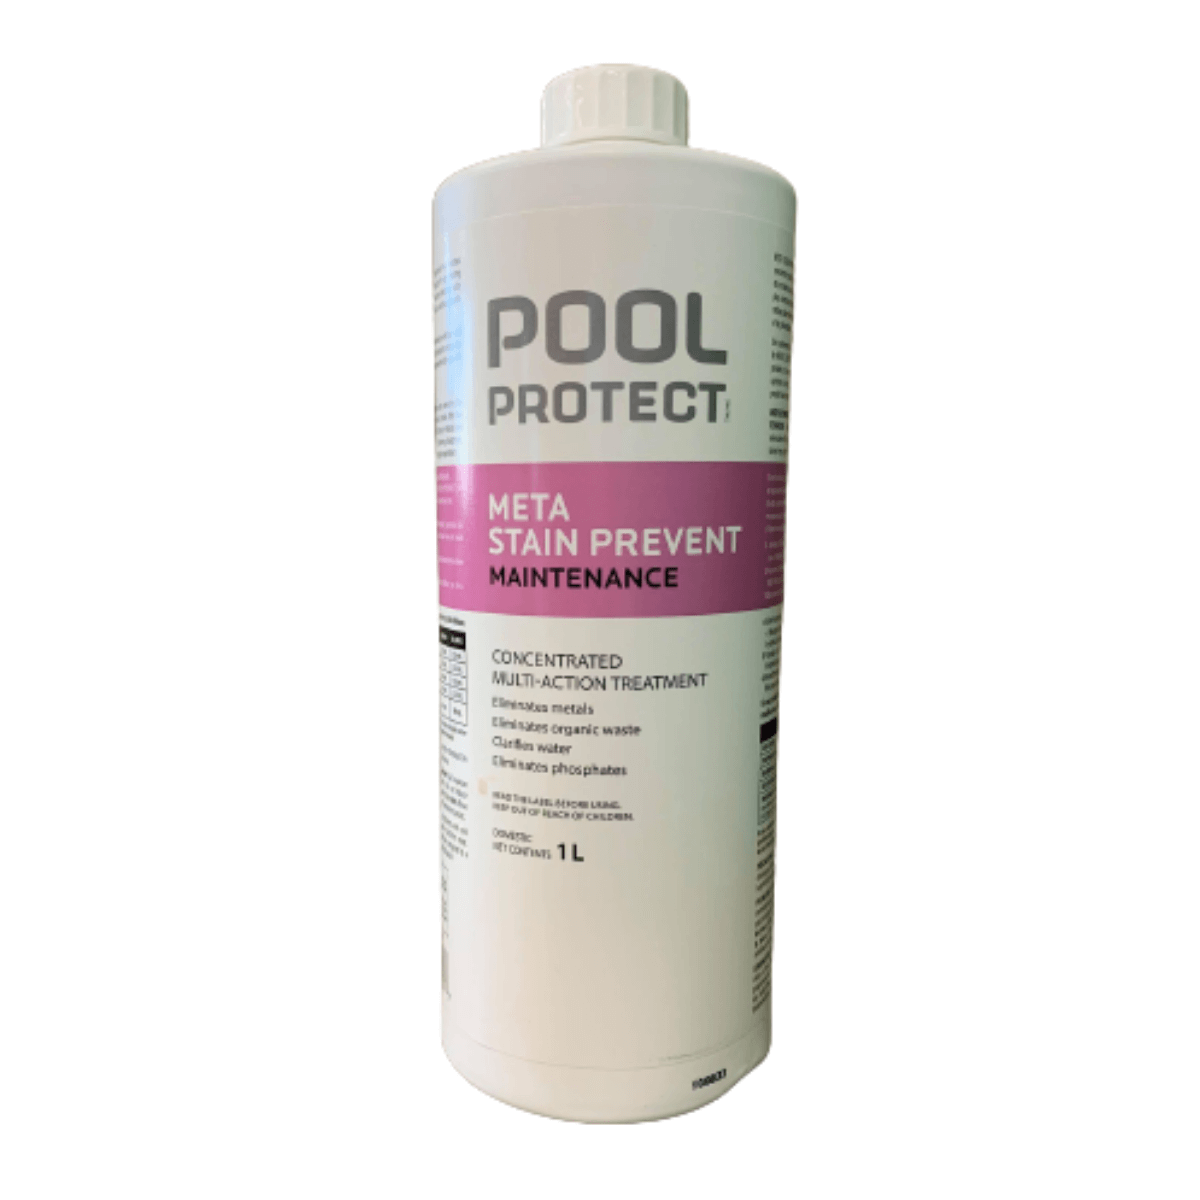 Pool Protect Meta Stain Prevent 